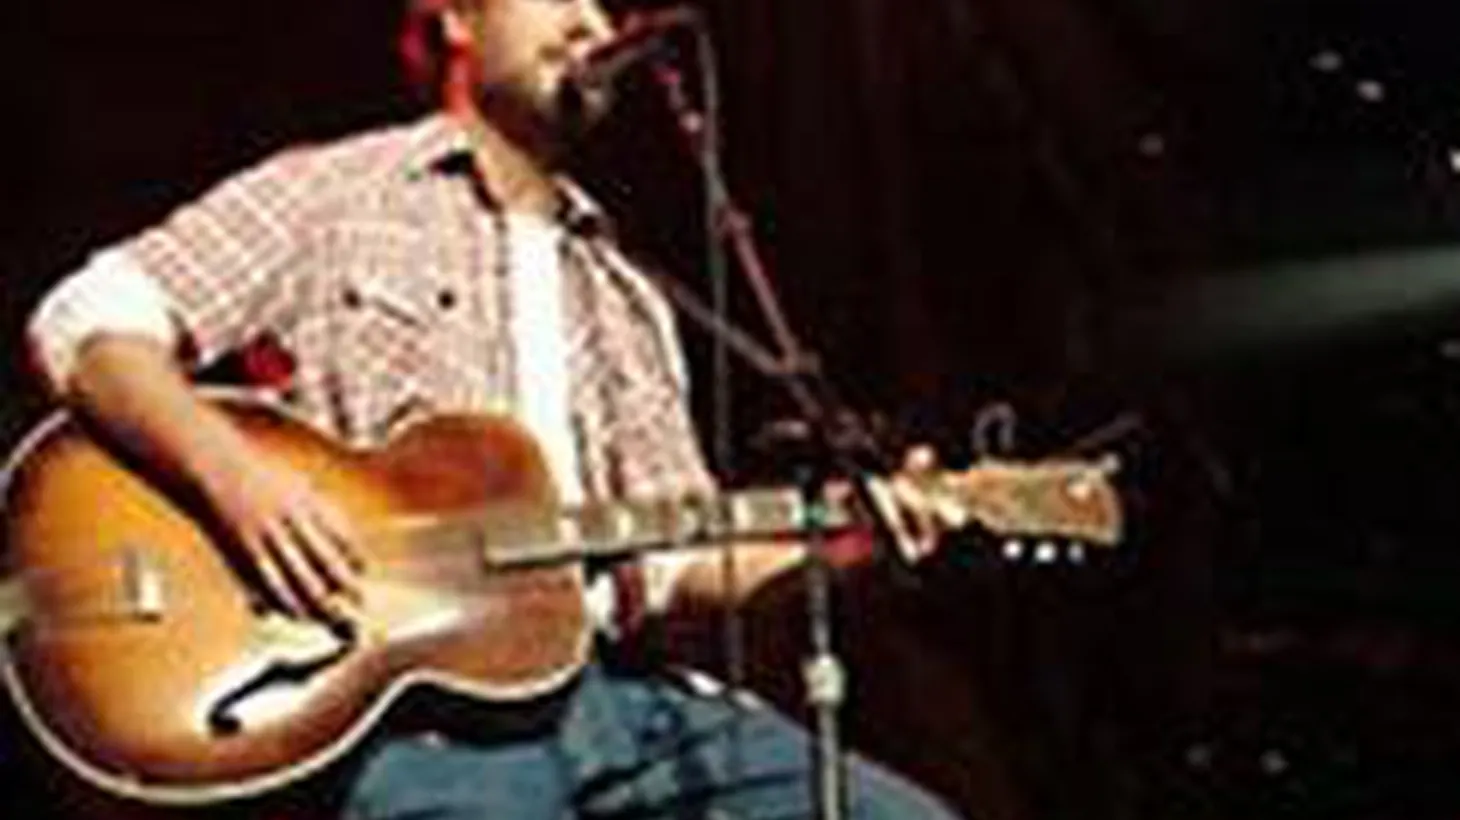 Ramsay Midwood brings some of his down-home rootsy music to  Morning Becomes Eclectic  at 11:15am.